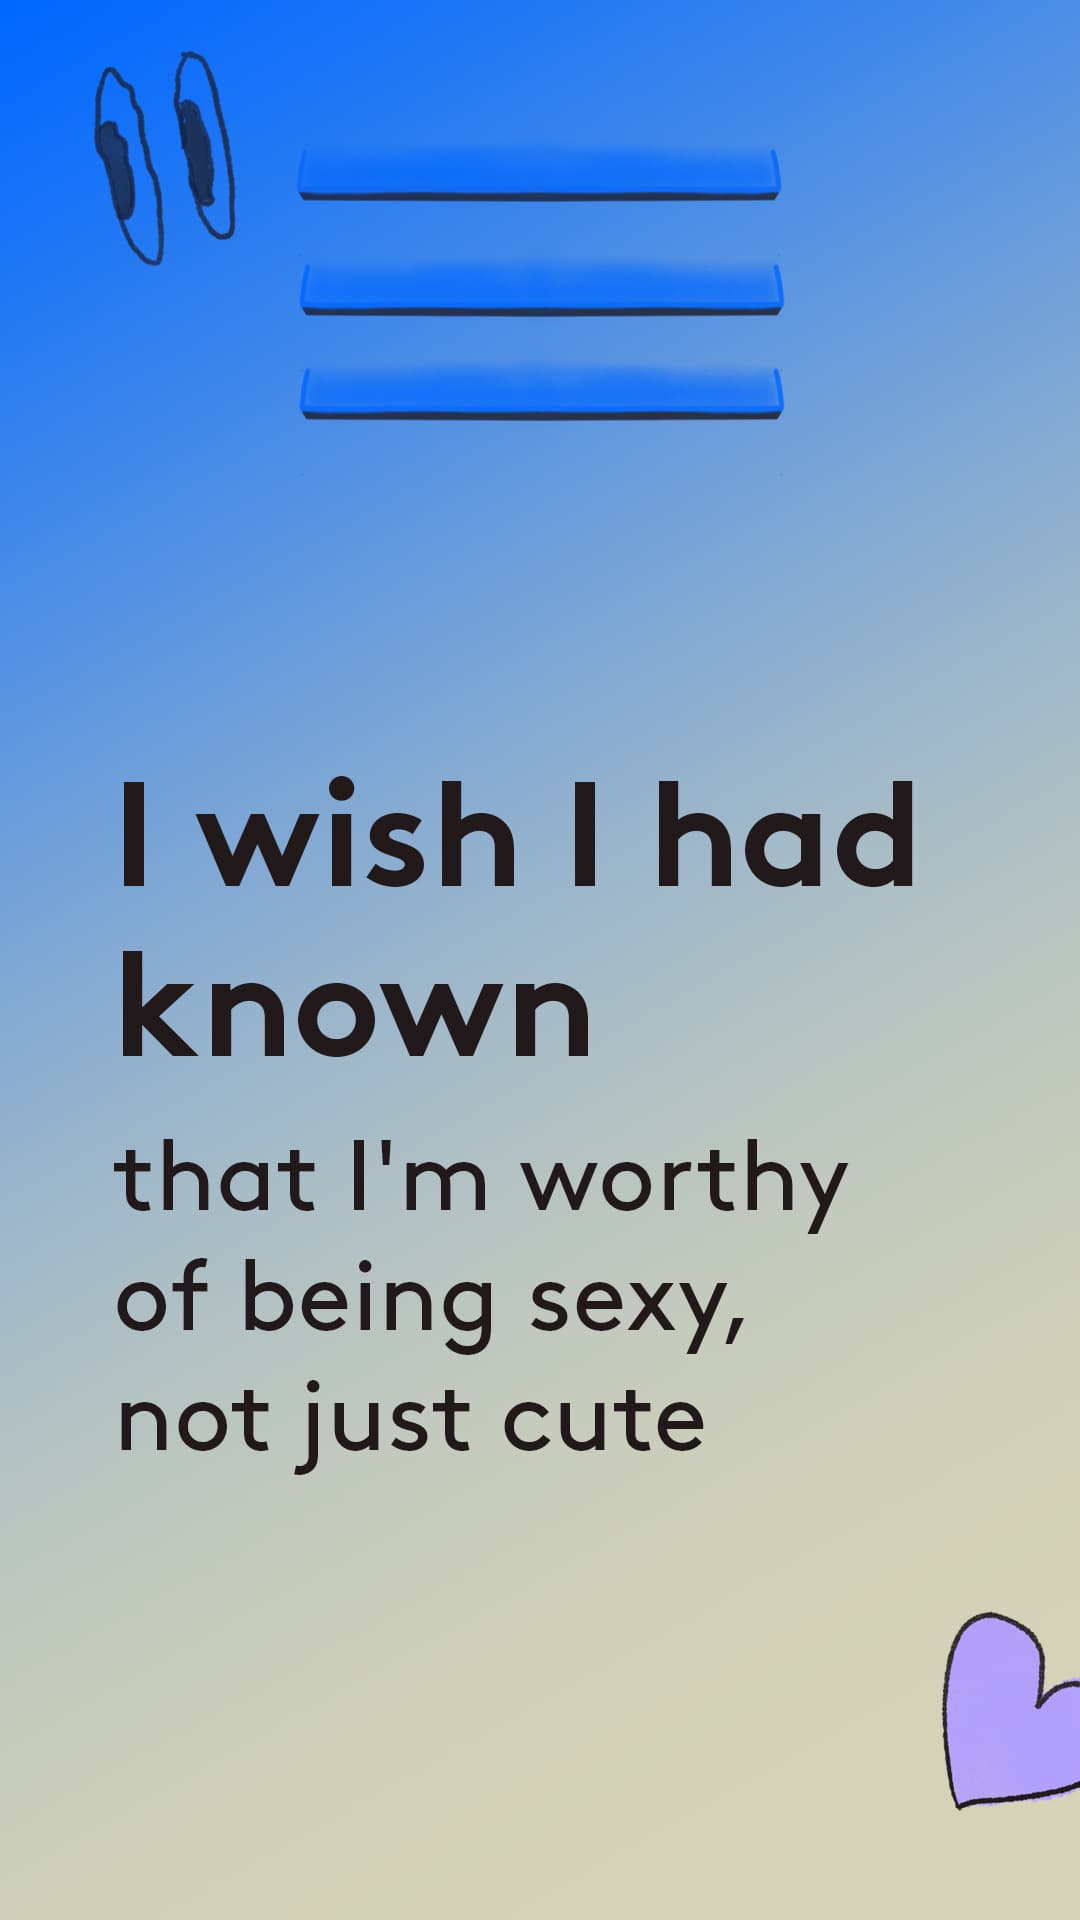 I wish i had known that im worthy of being sexy, not just cute